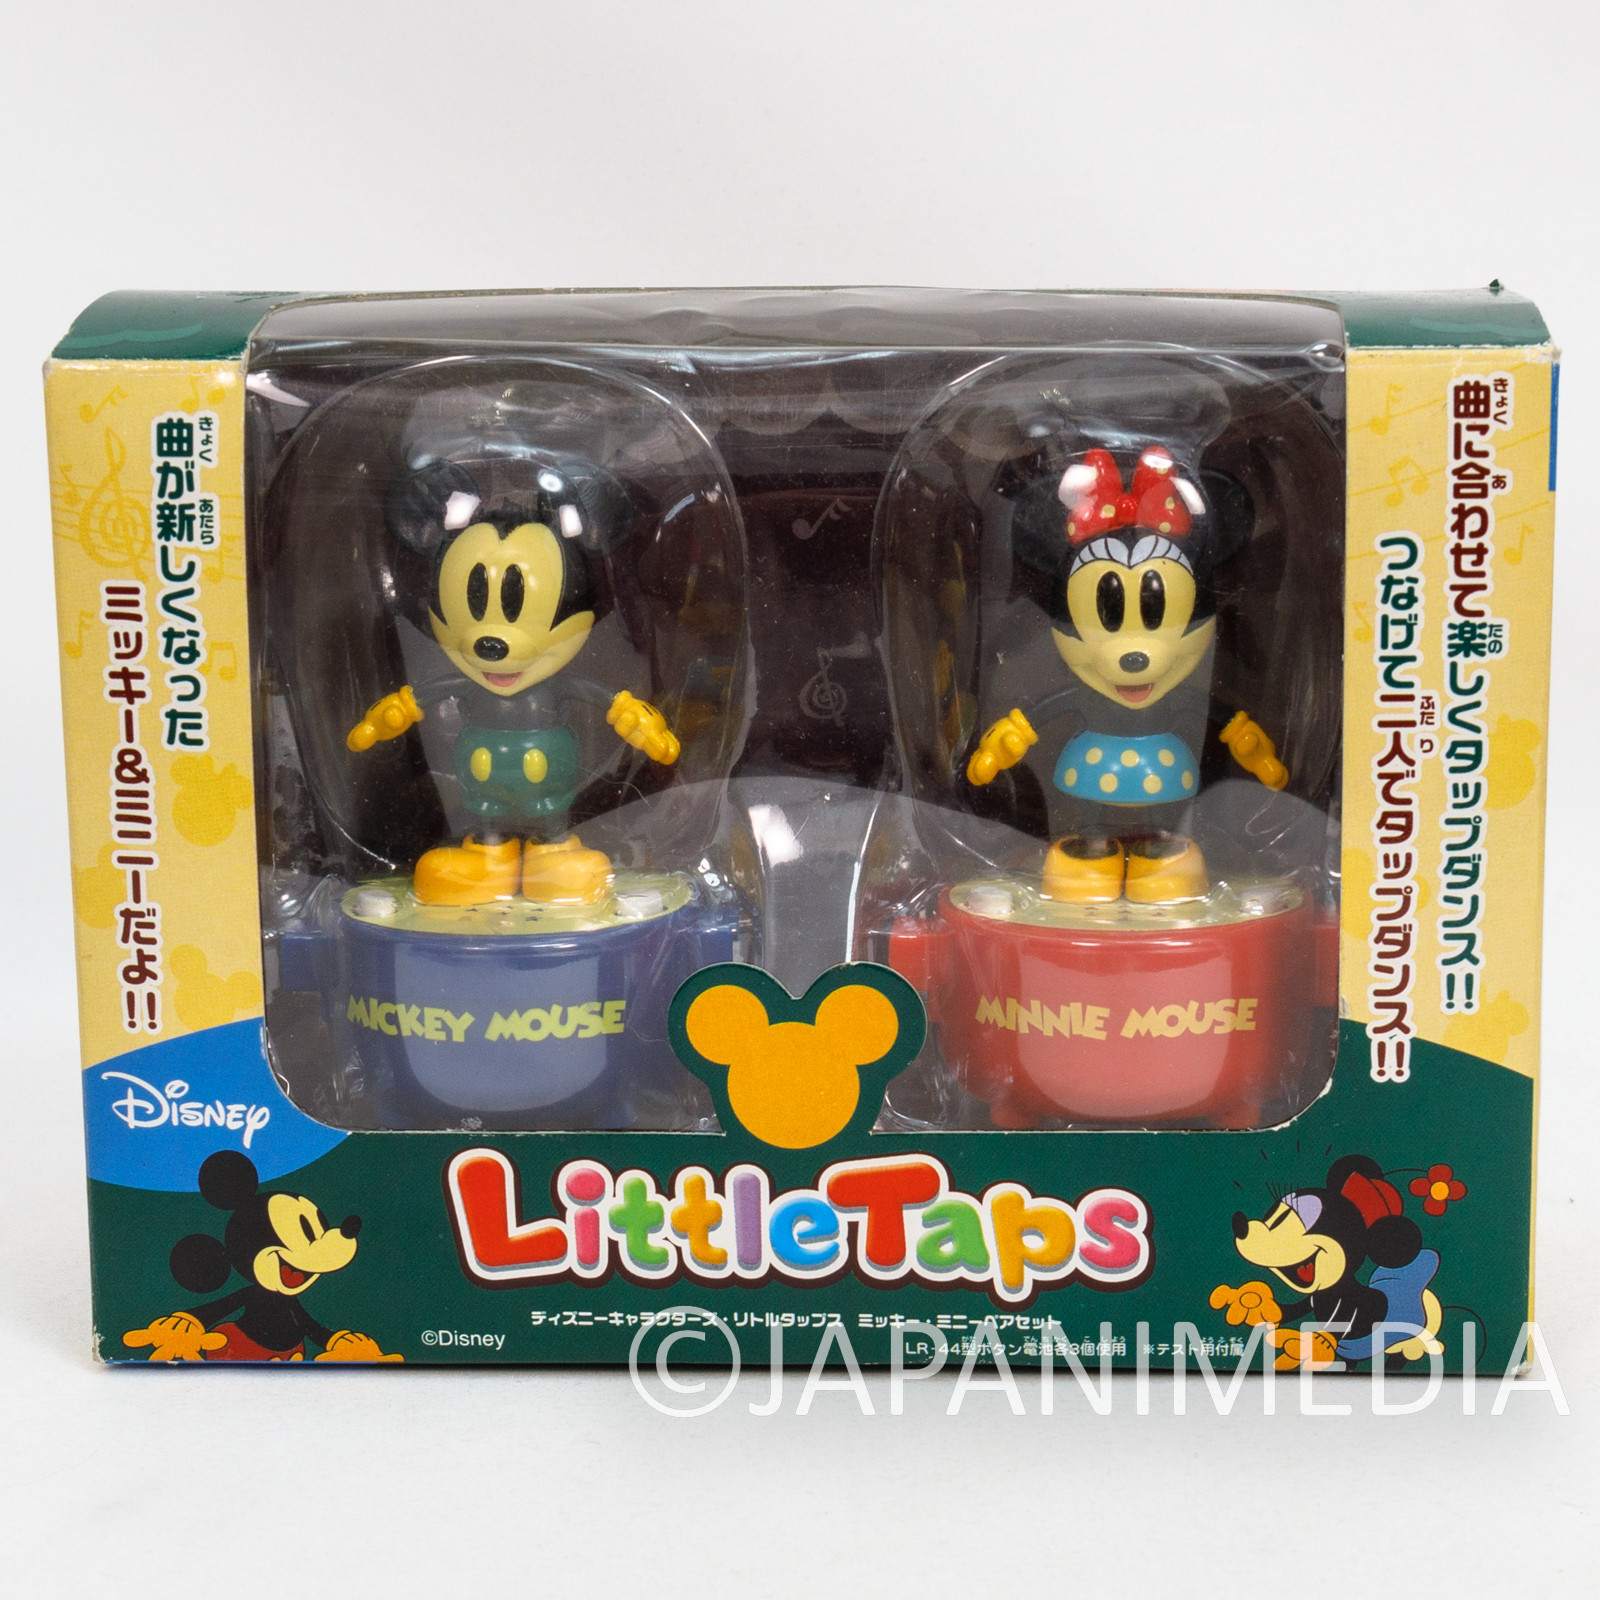 RARE! Disney Characters Mickey & Minnie Mouse Little Taps Sound Toy Figure JAPAN